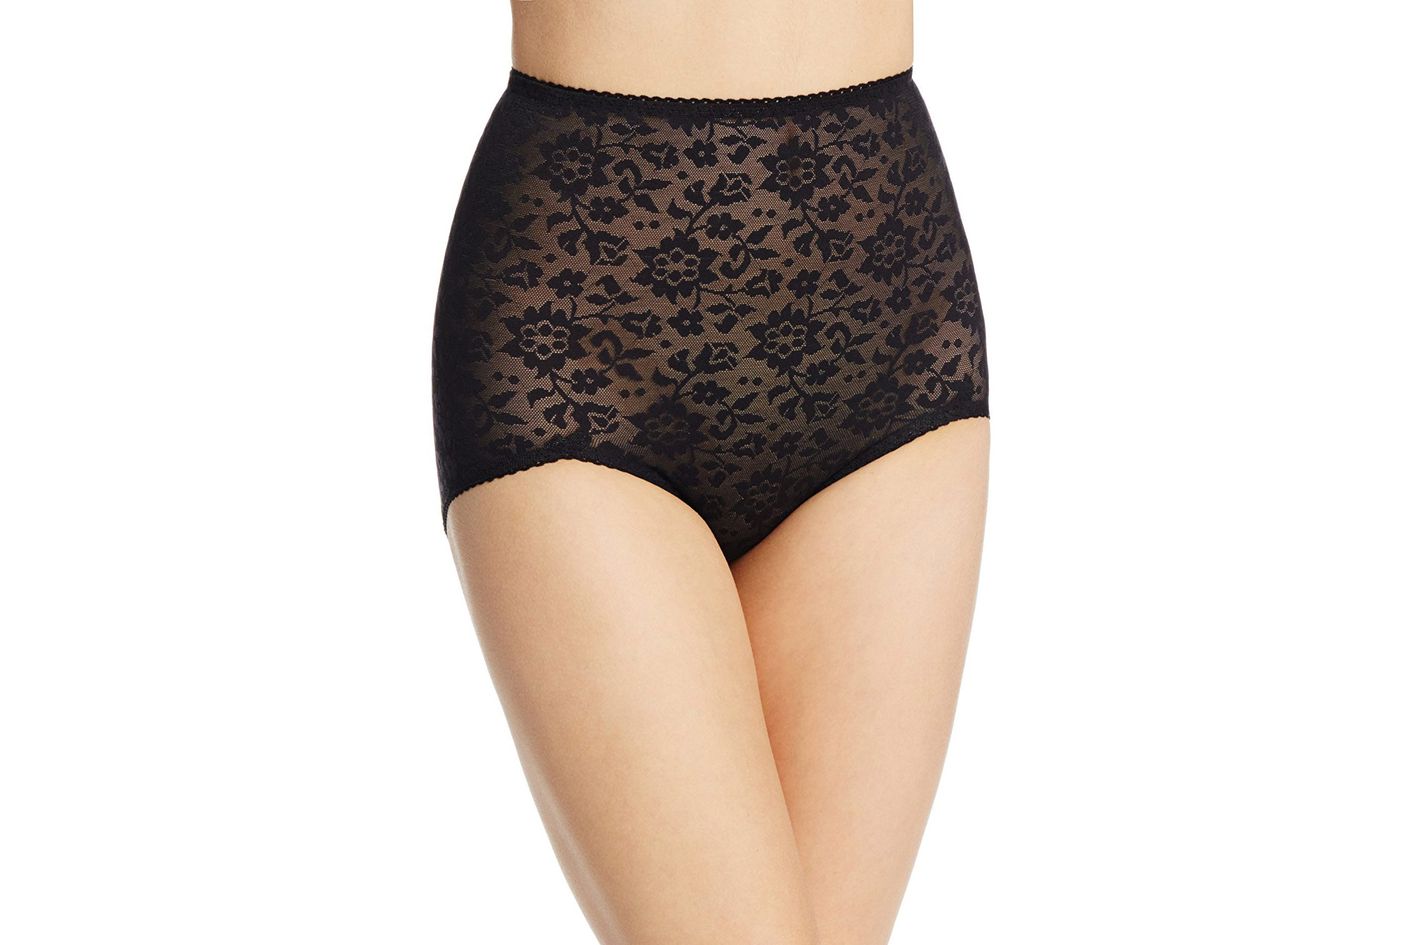 Level 2 Totally Smooth Ultra High-Waist Brief Panty